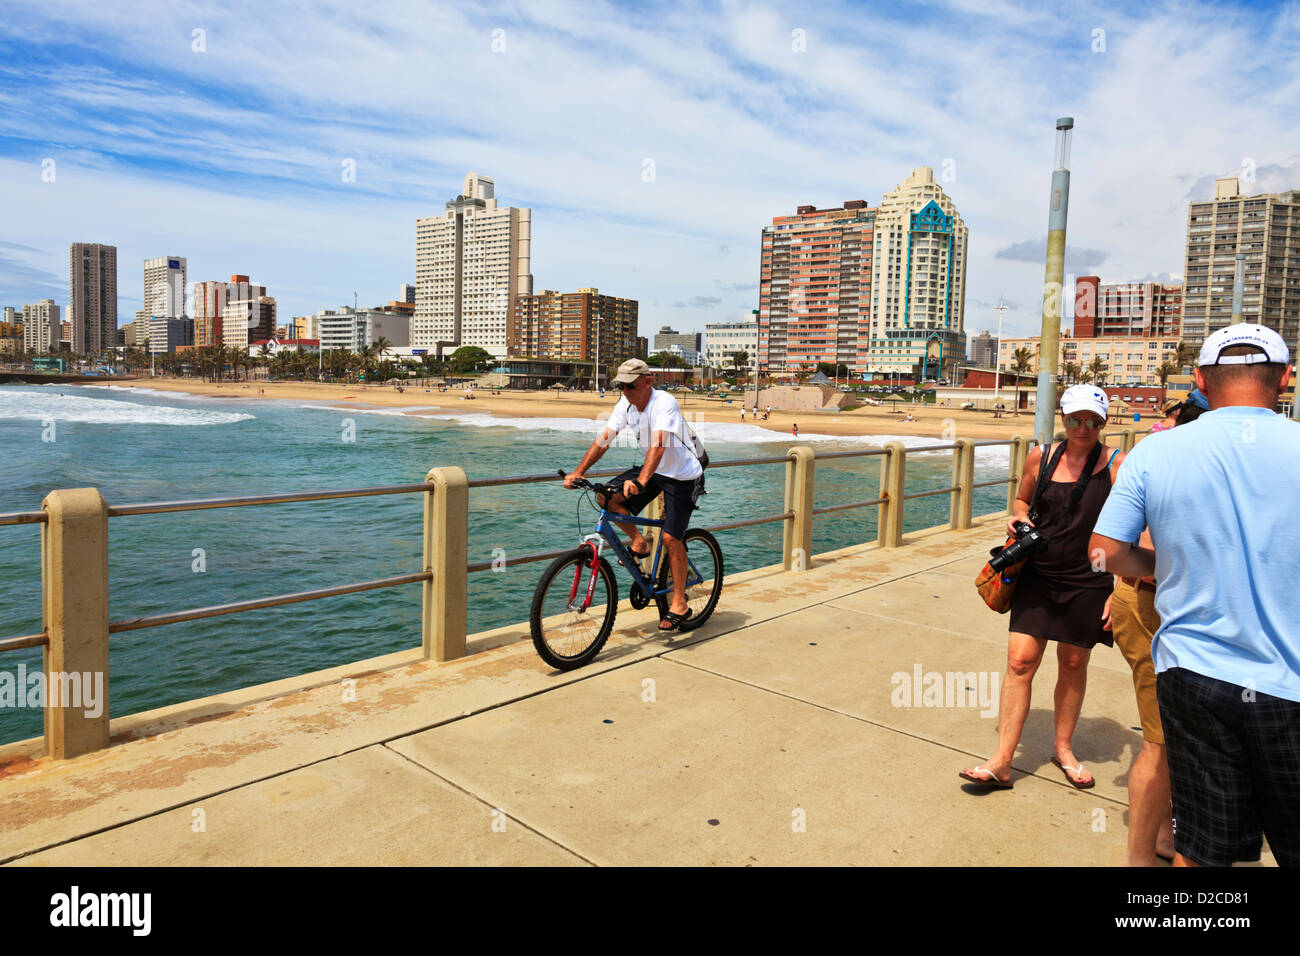 Durban, South Africa. People enjoy the outdoors along the pier at Durban's North Beach. Durban South Africa. Stock Photo